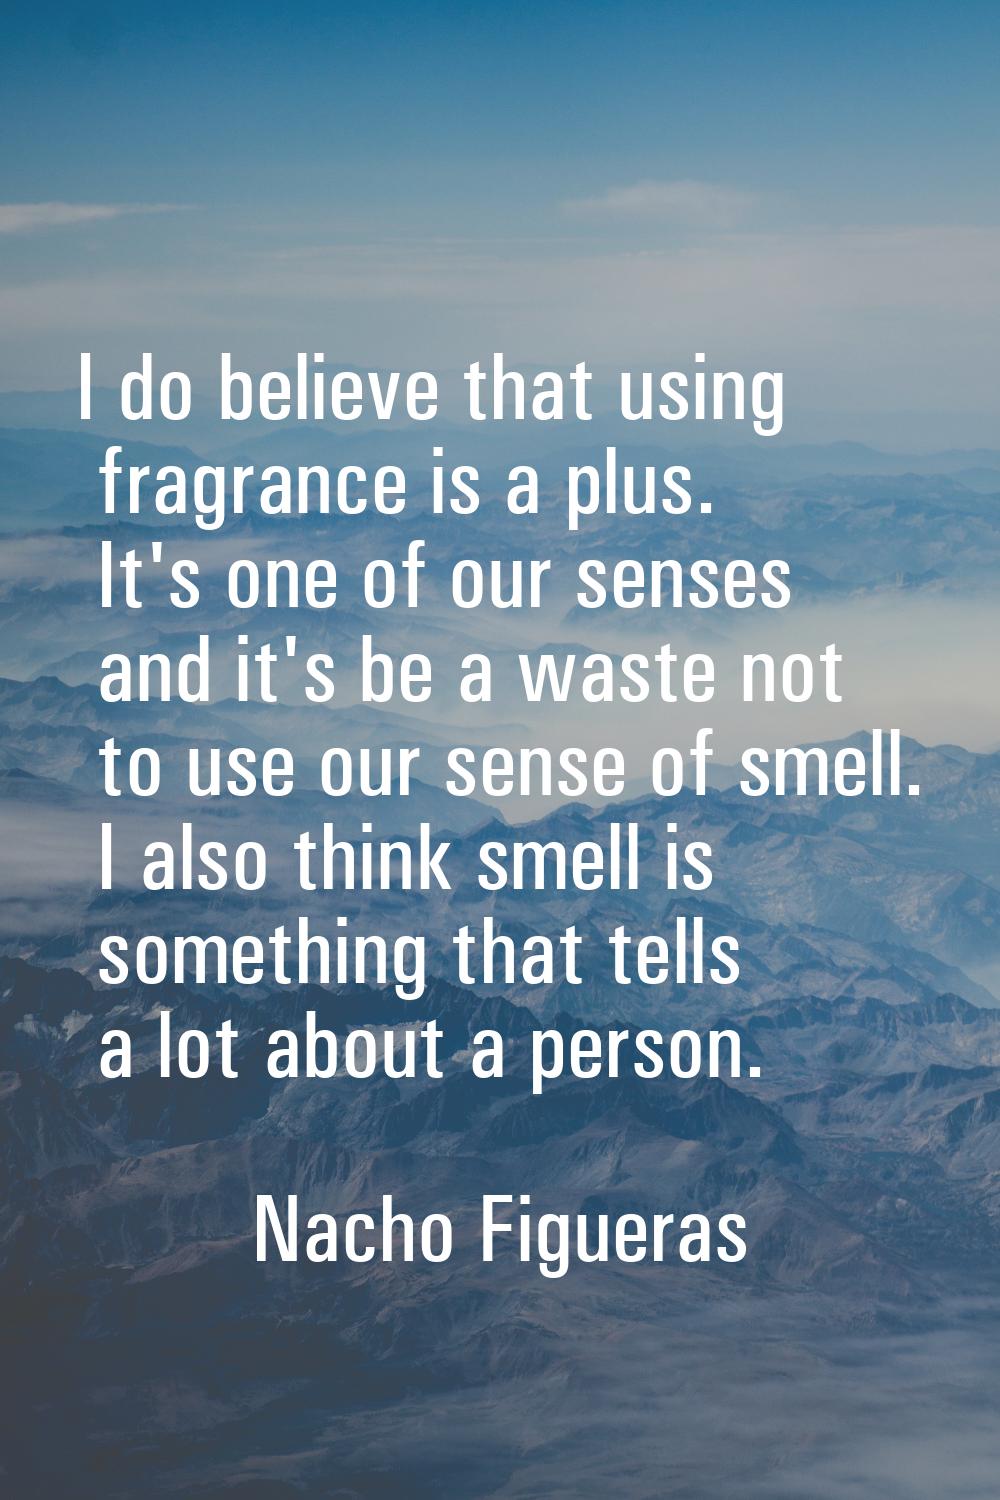 I do believe that using fragrance is a plus. It's one of our senses and it's be a waste not to use 